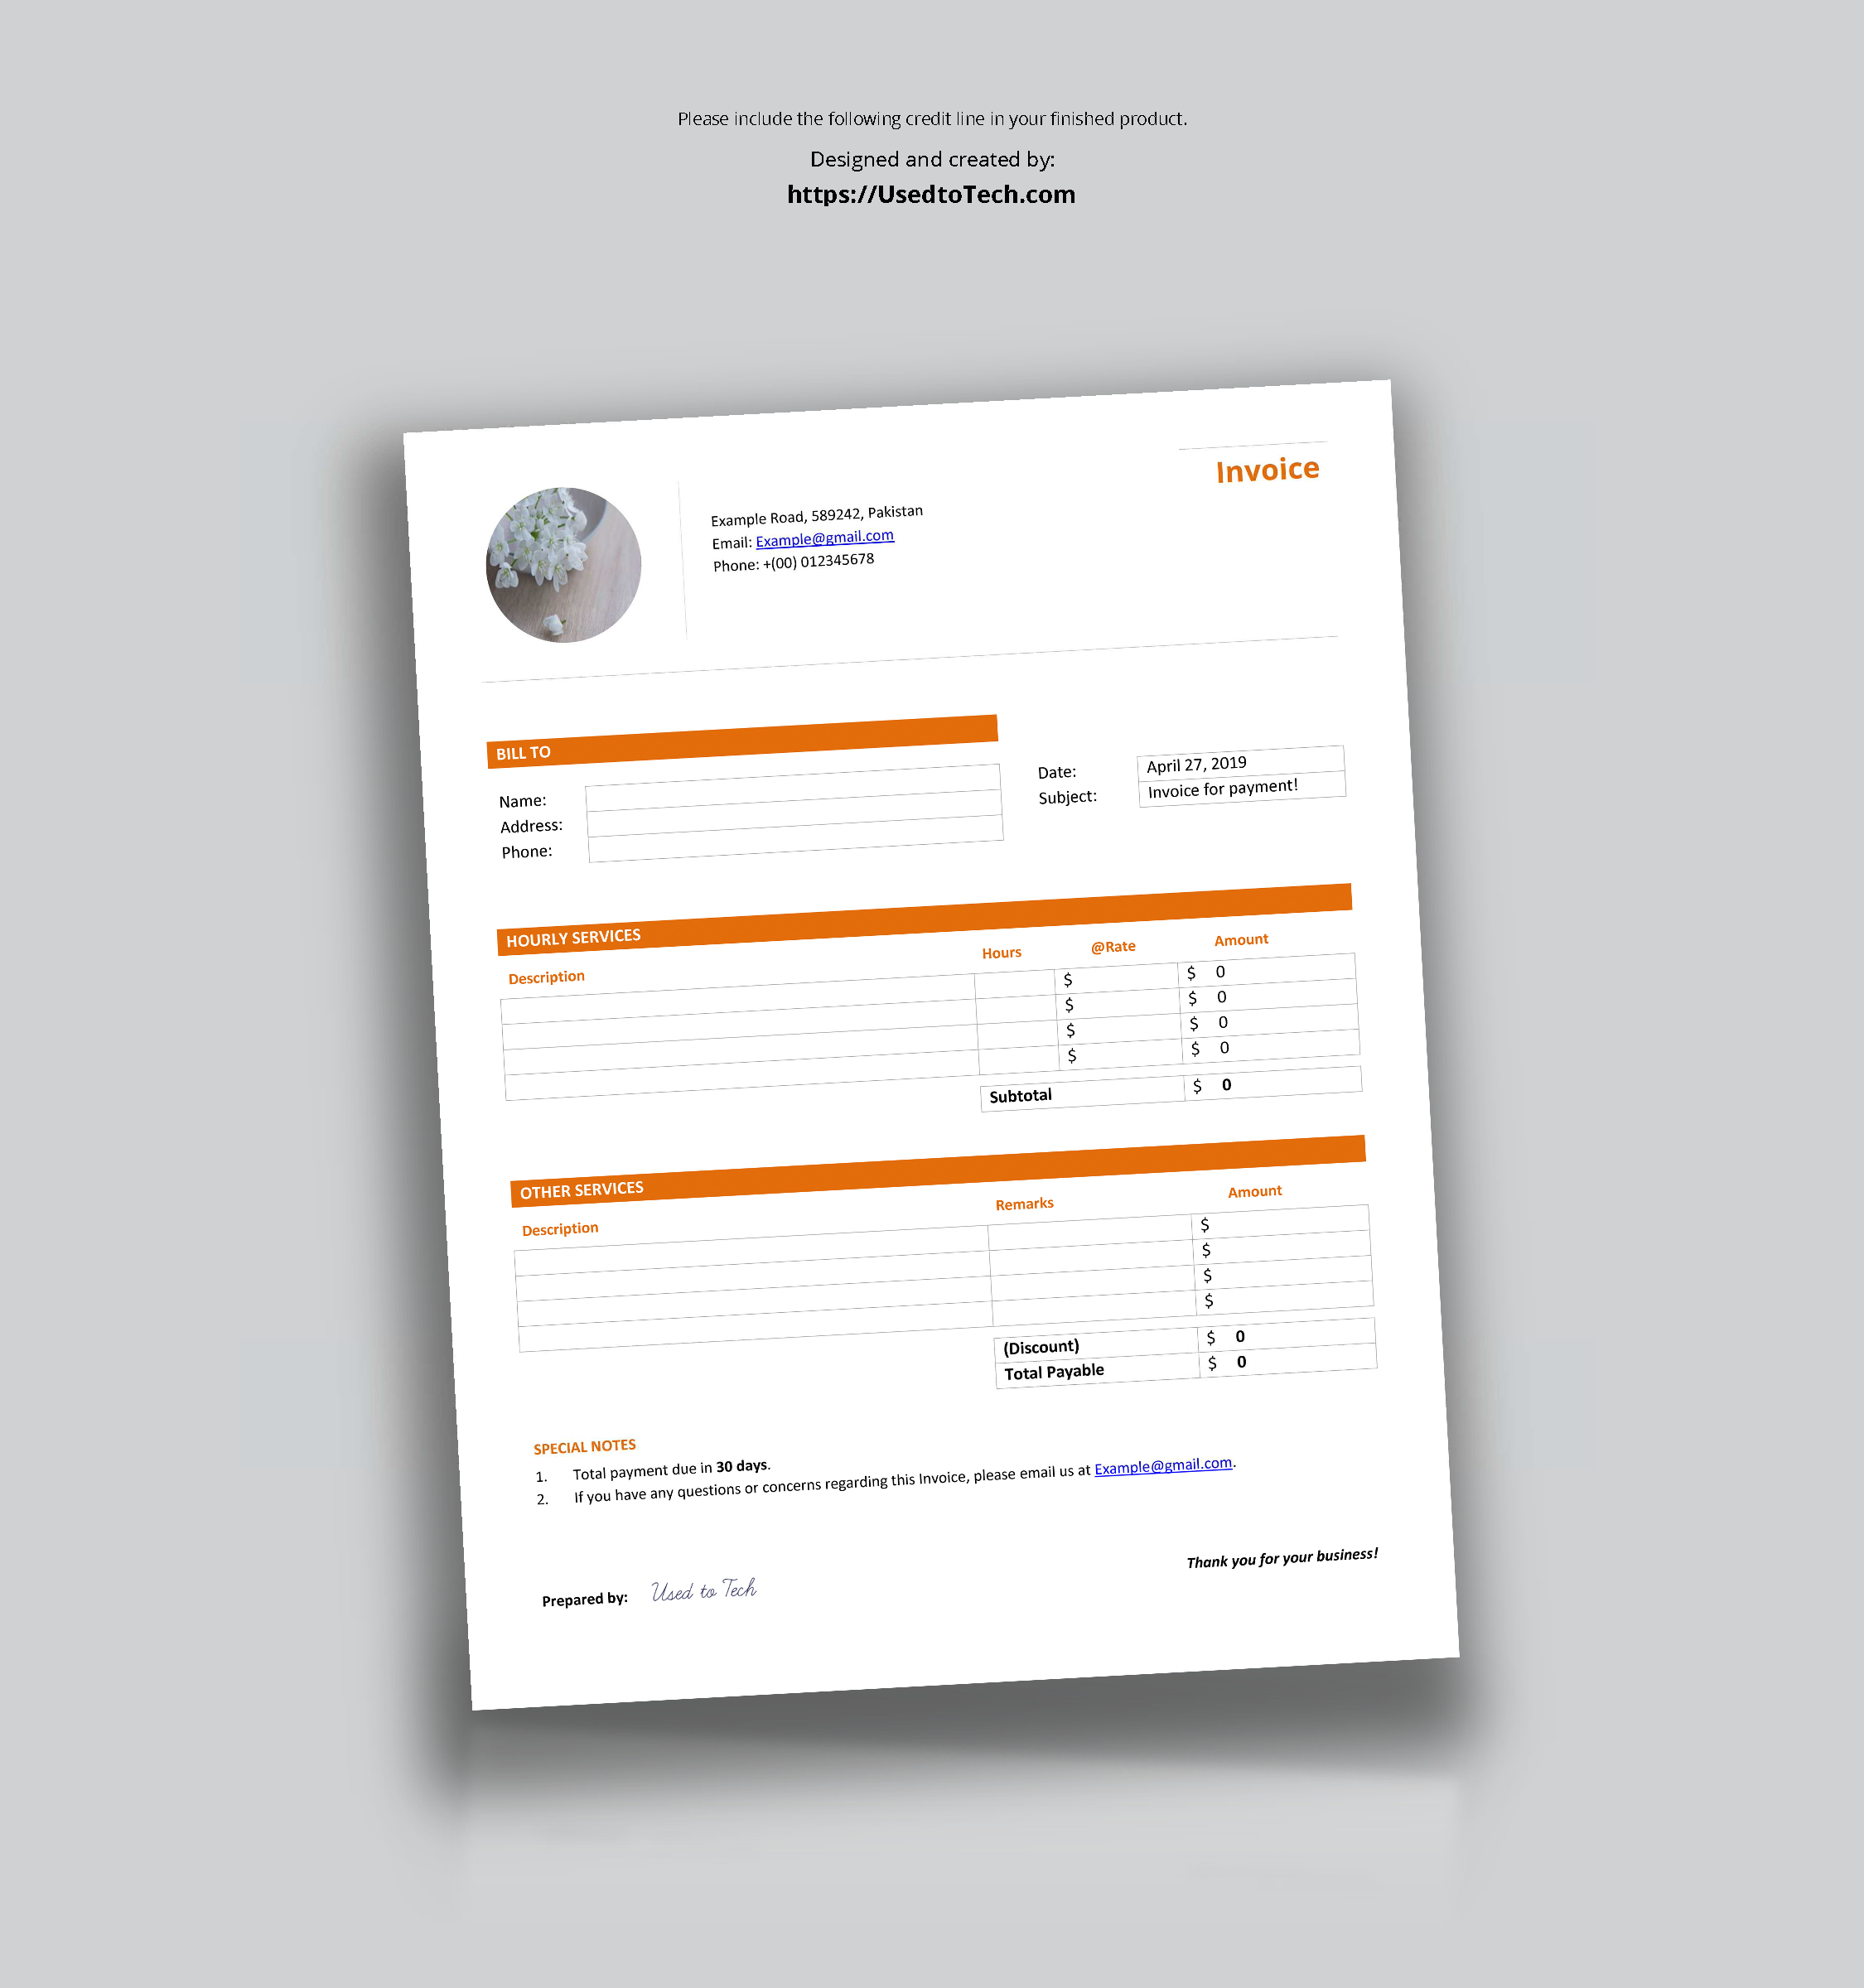 Professional Looking & Free Invoice Template In Word – Used Pertaining To Header Templates For Word